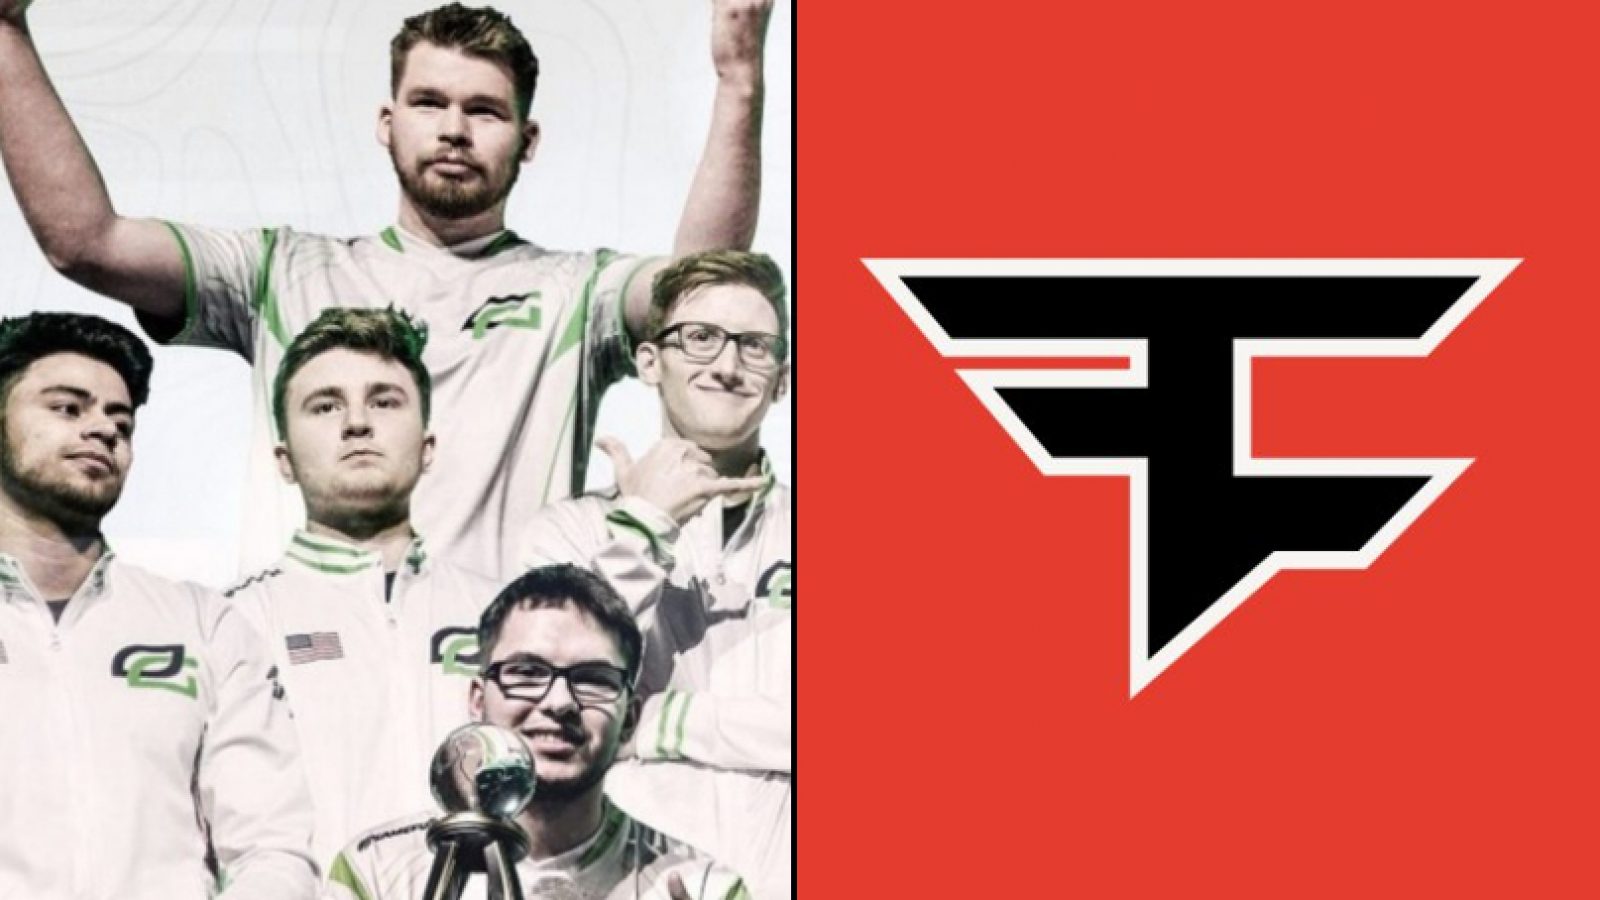 FaZe clan is recruiting everyone who signs a document